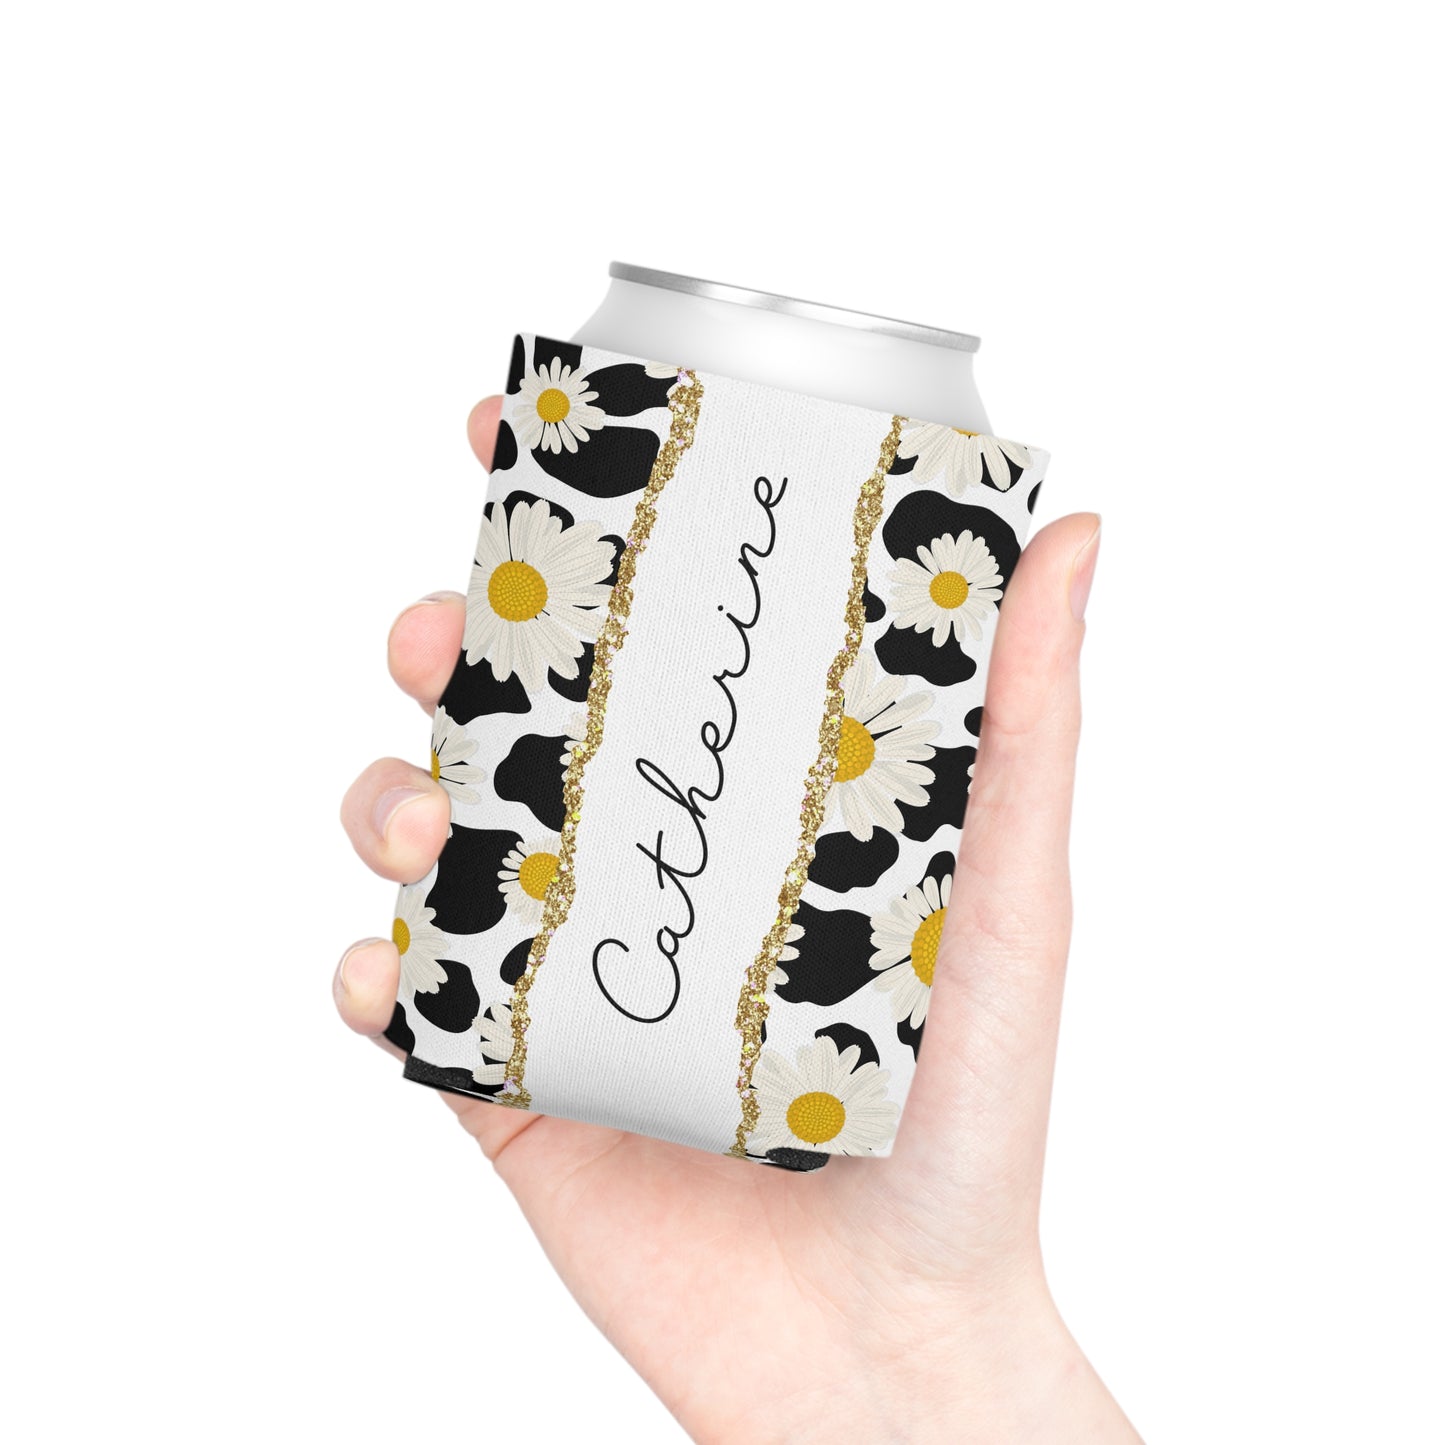 Personalized Cow Print Can Koozie / Daisy Can Cooler